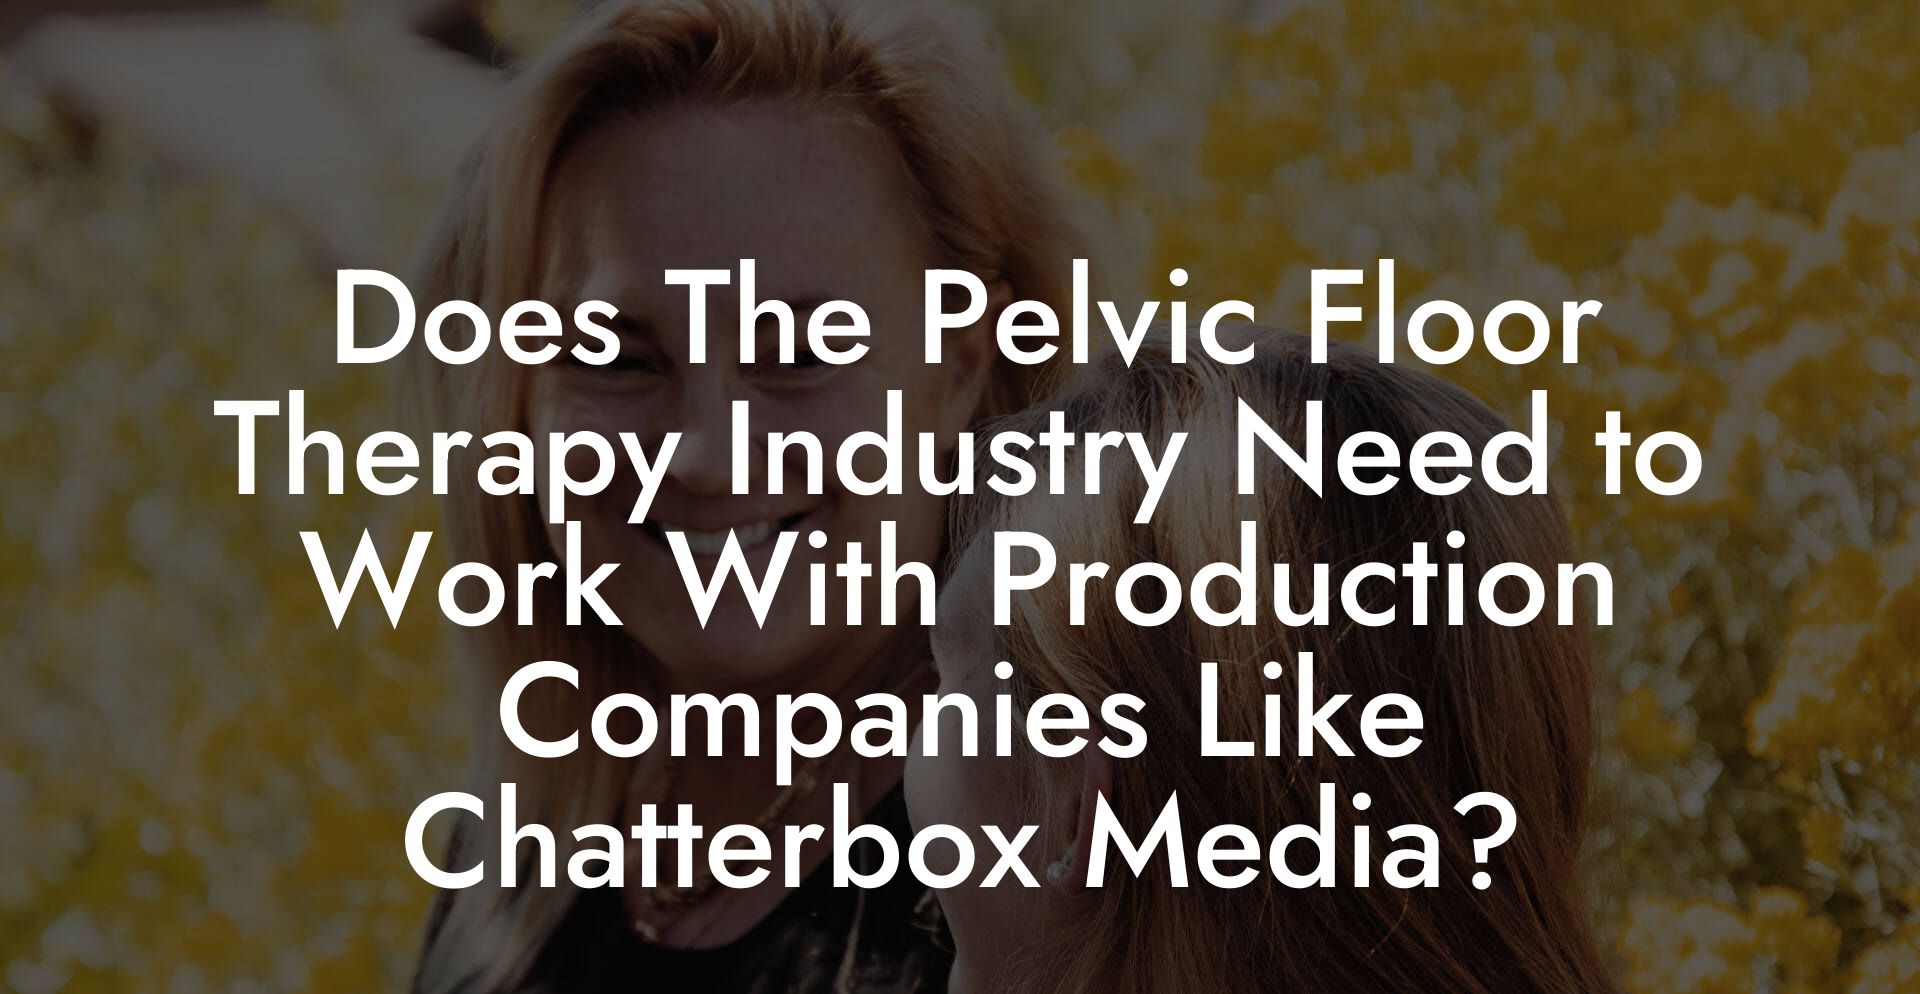 Does The Pelvic Floor Therapy Industry Need to Work With Production Companies Like Chatterbox Media?